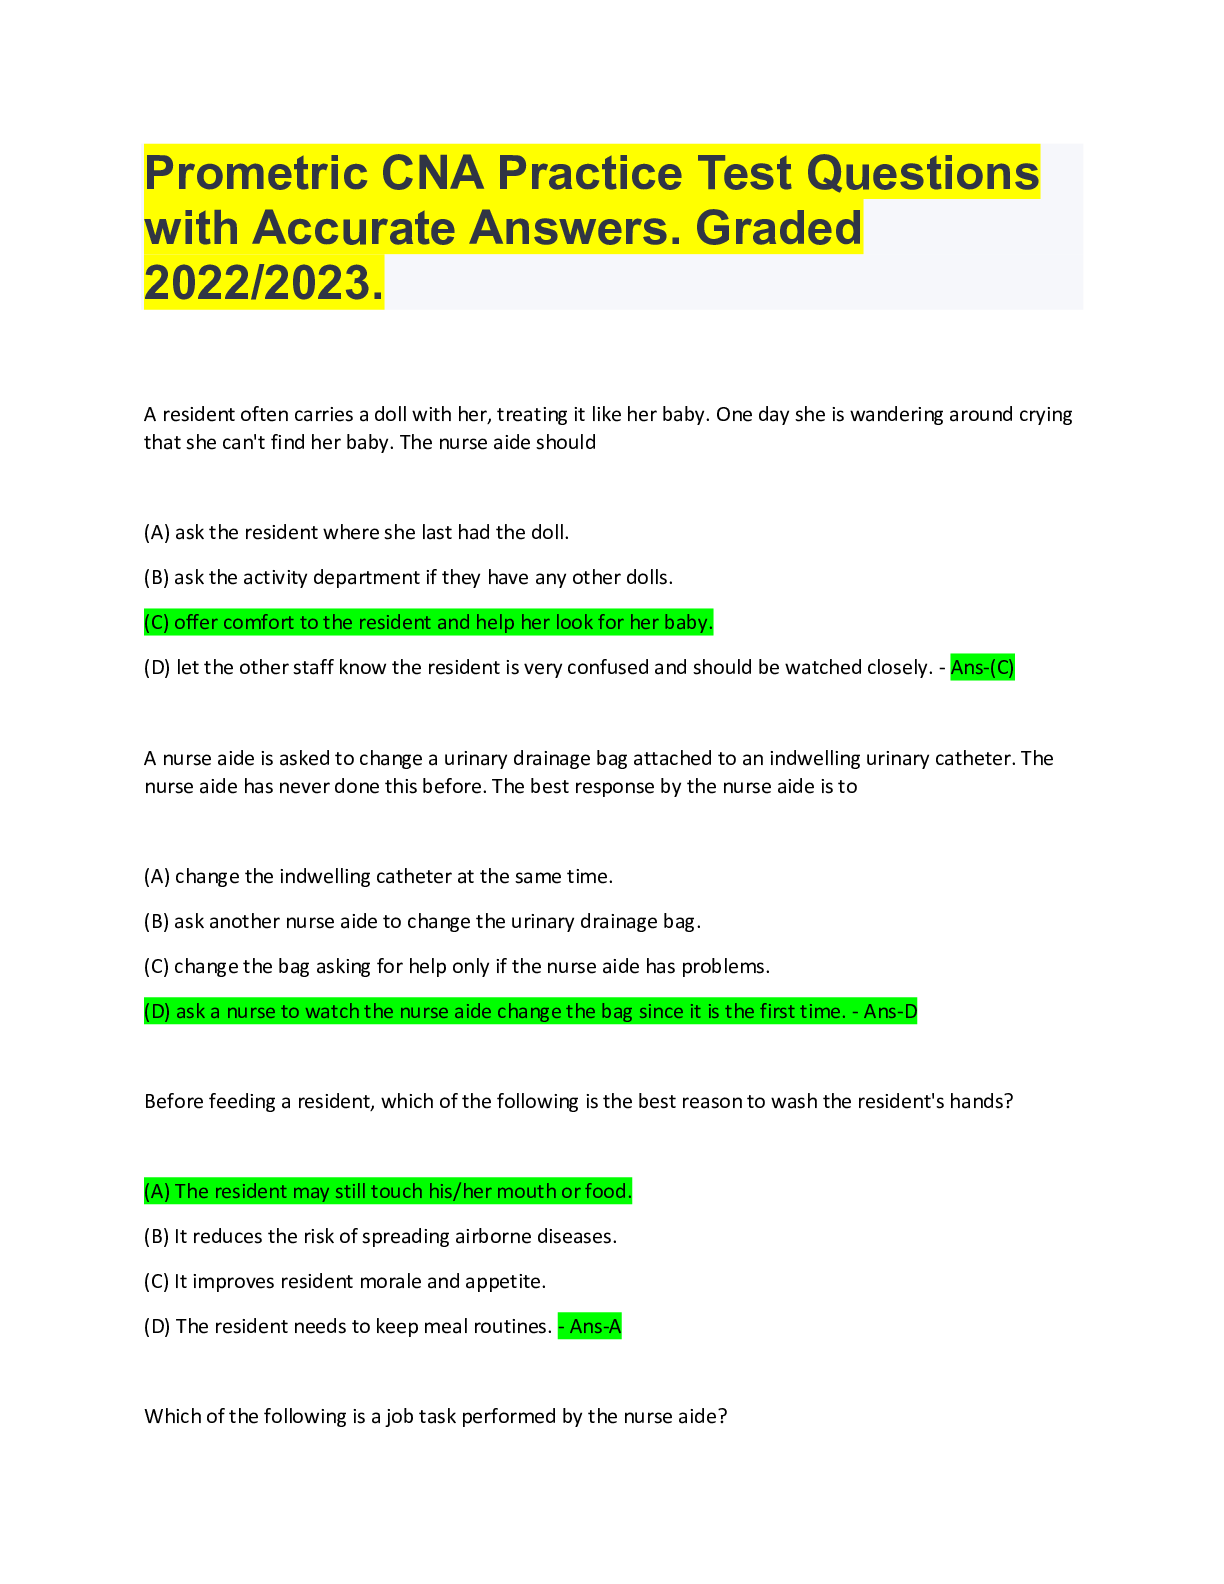 prometric-cna-practice-test-questions-with-accurate-answers-graded